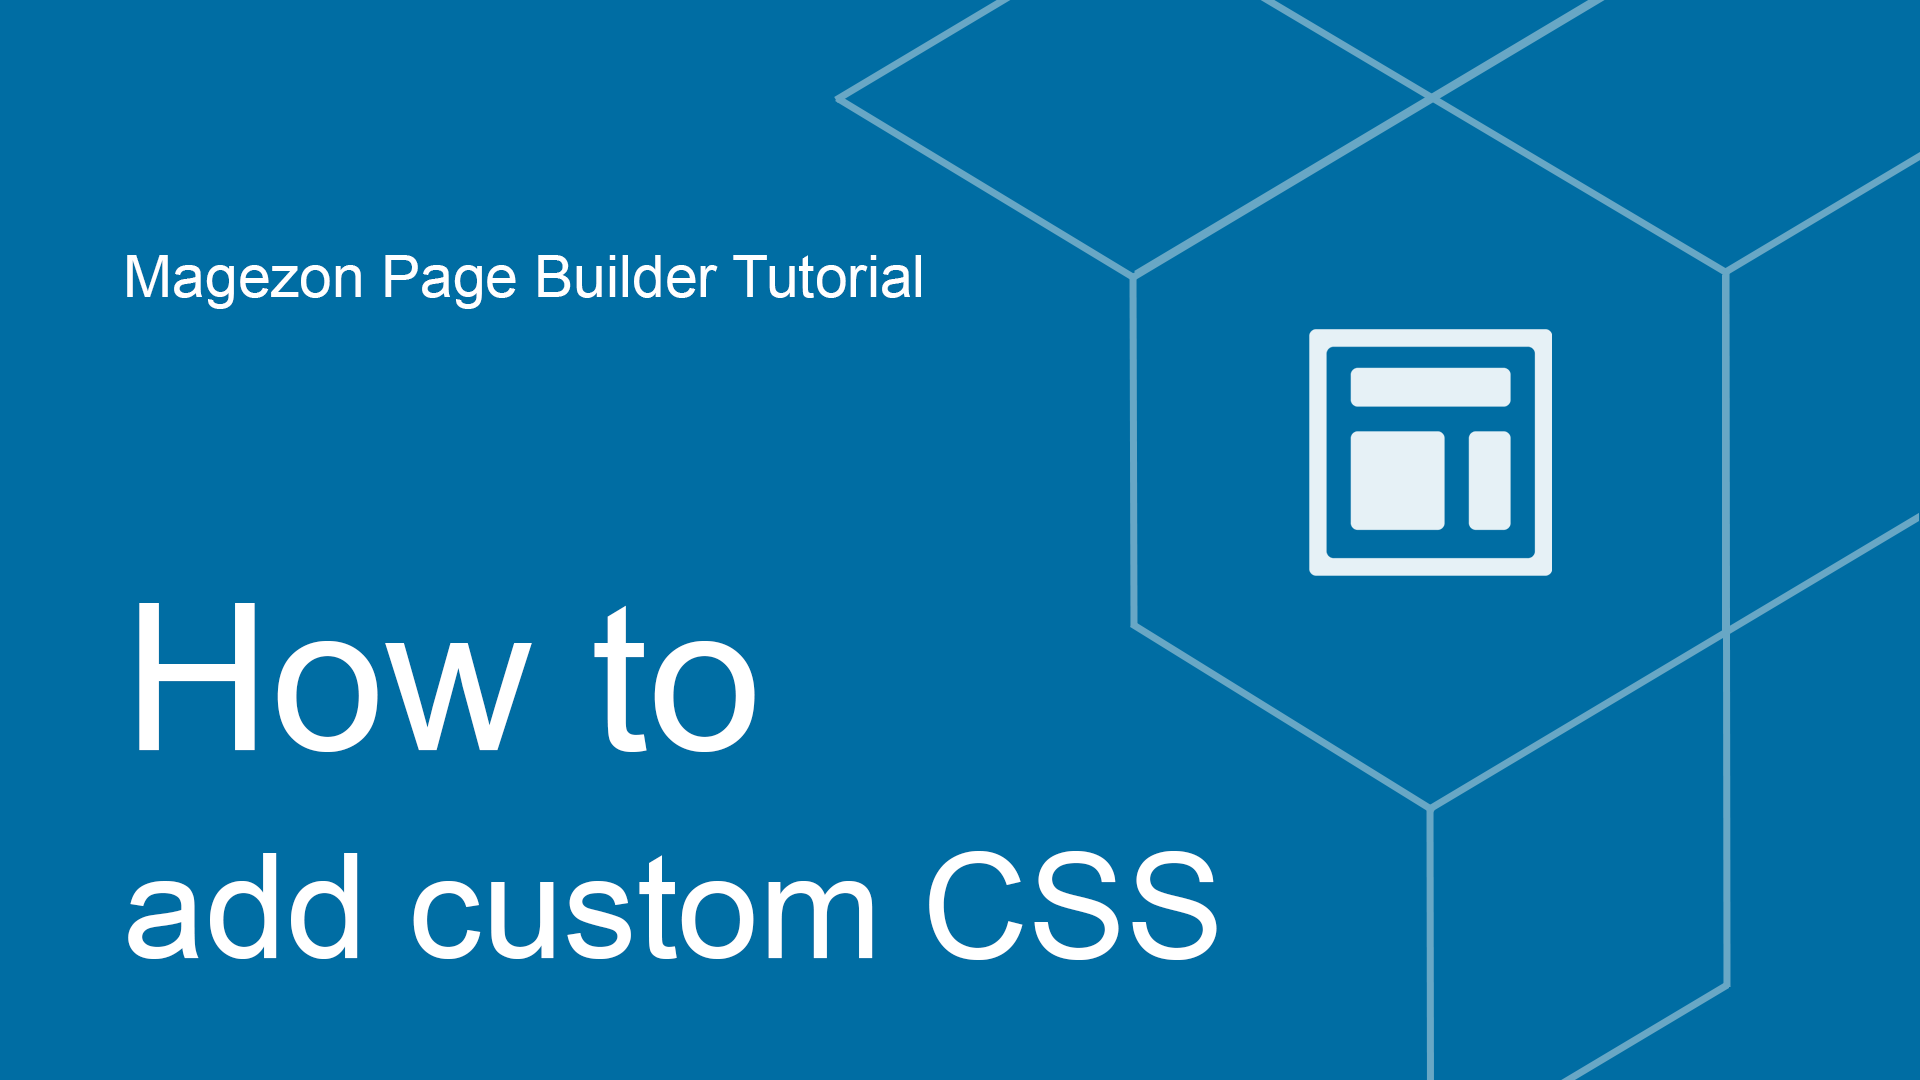 How to add custom CSS in Magezon Page Builder